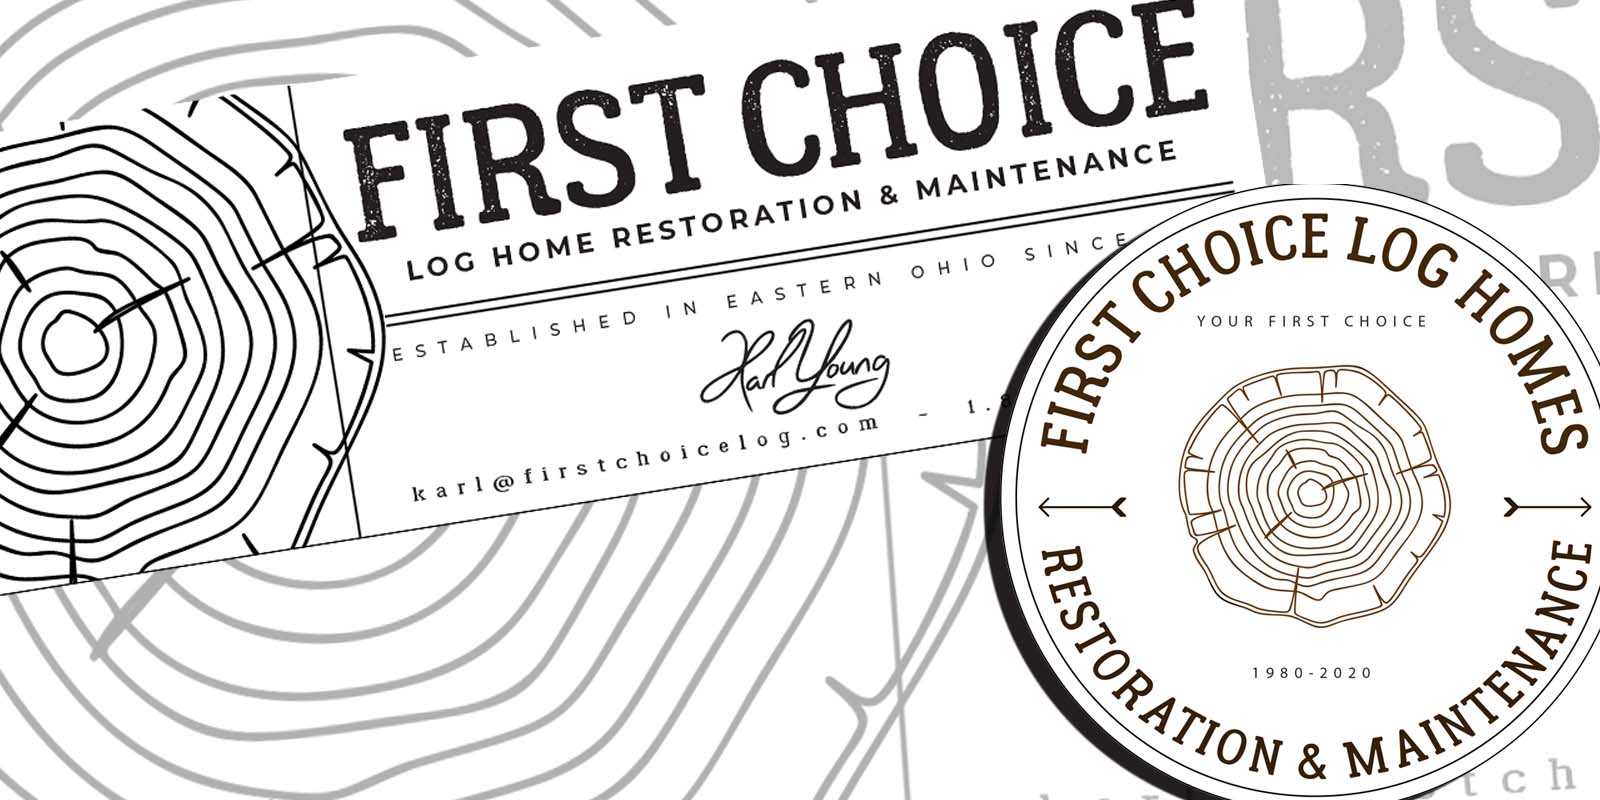 New Branding Logos and Marketing Assets for log home restoration company